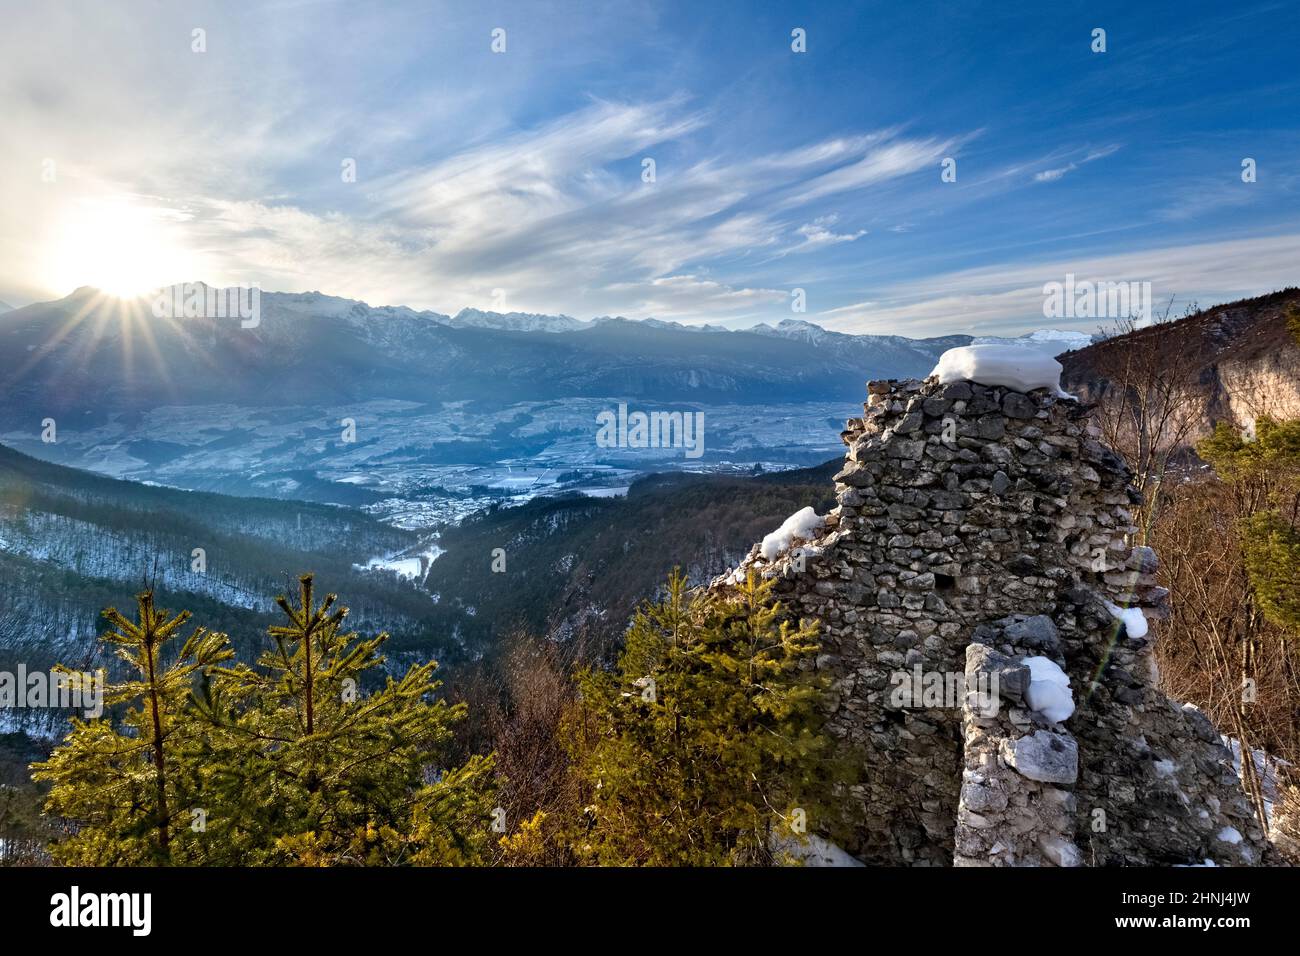 The ruins of San Pietro Castle and the sunset over Non Valley. Ton, Trento province, Trentino Alto-Adige, Italy, Europe. Stock Photo